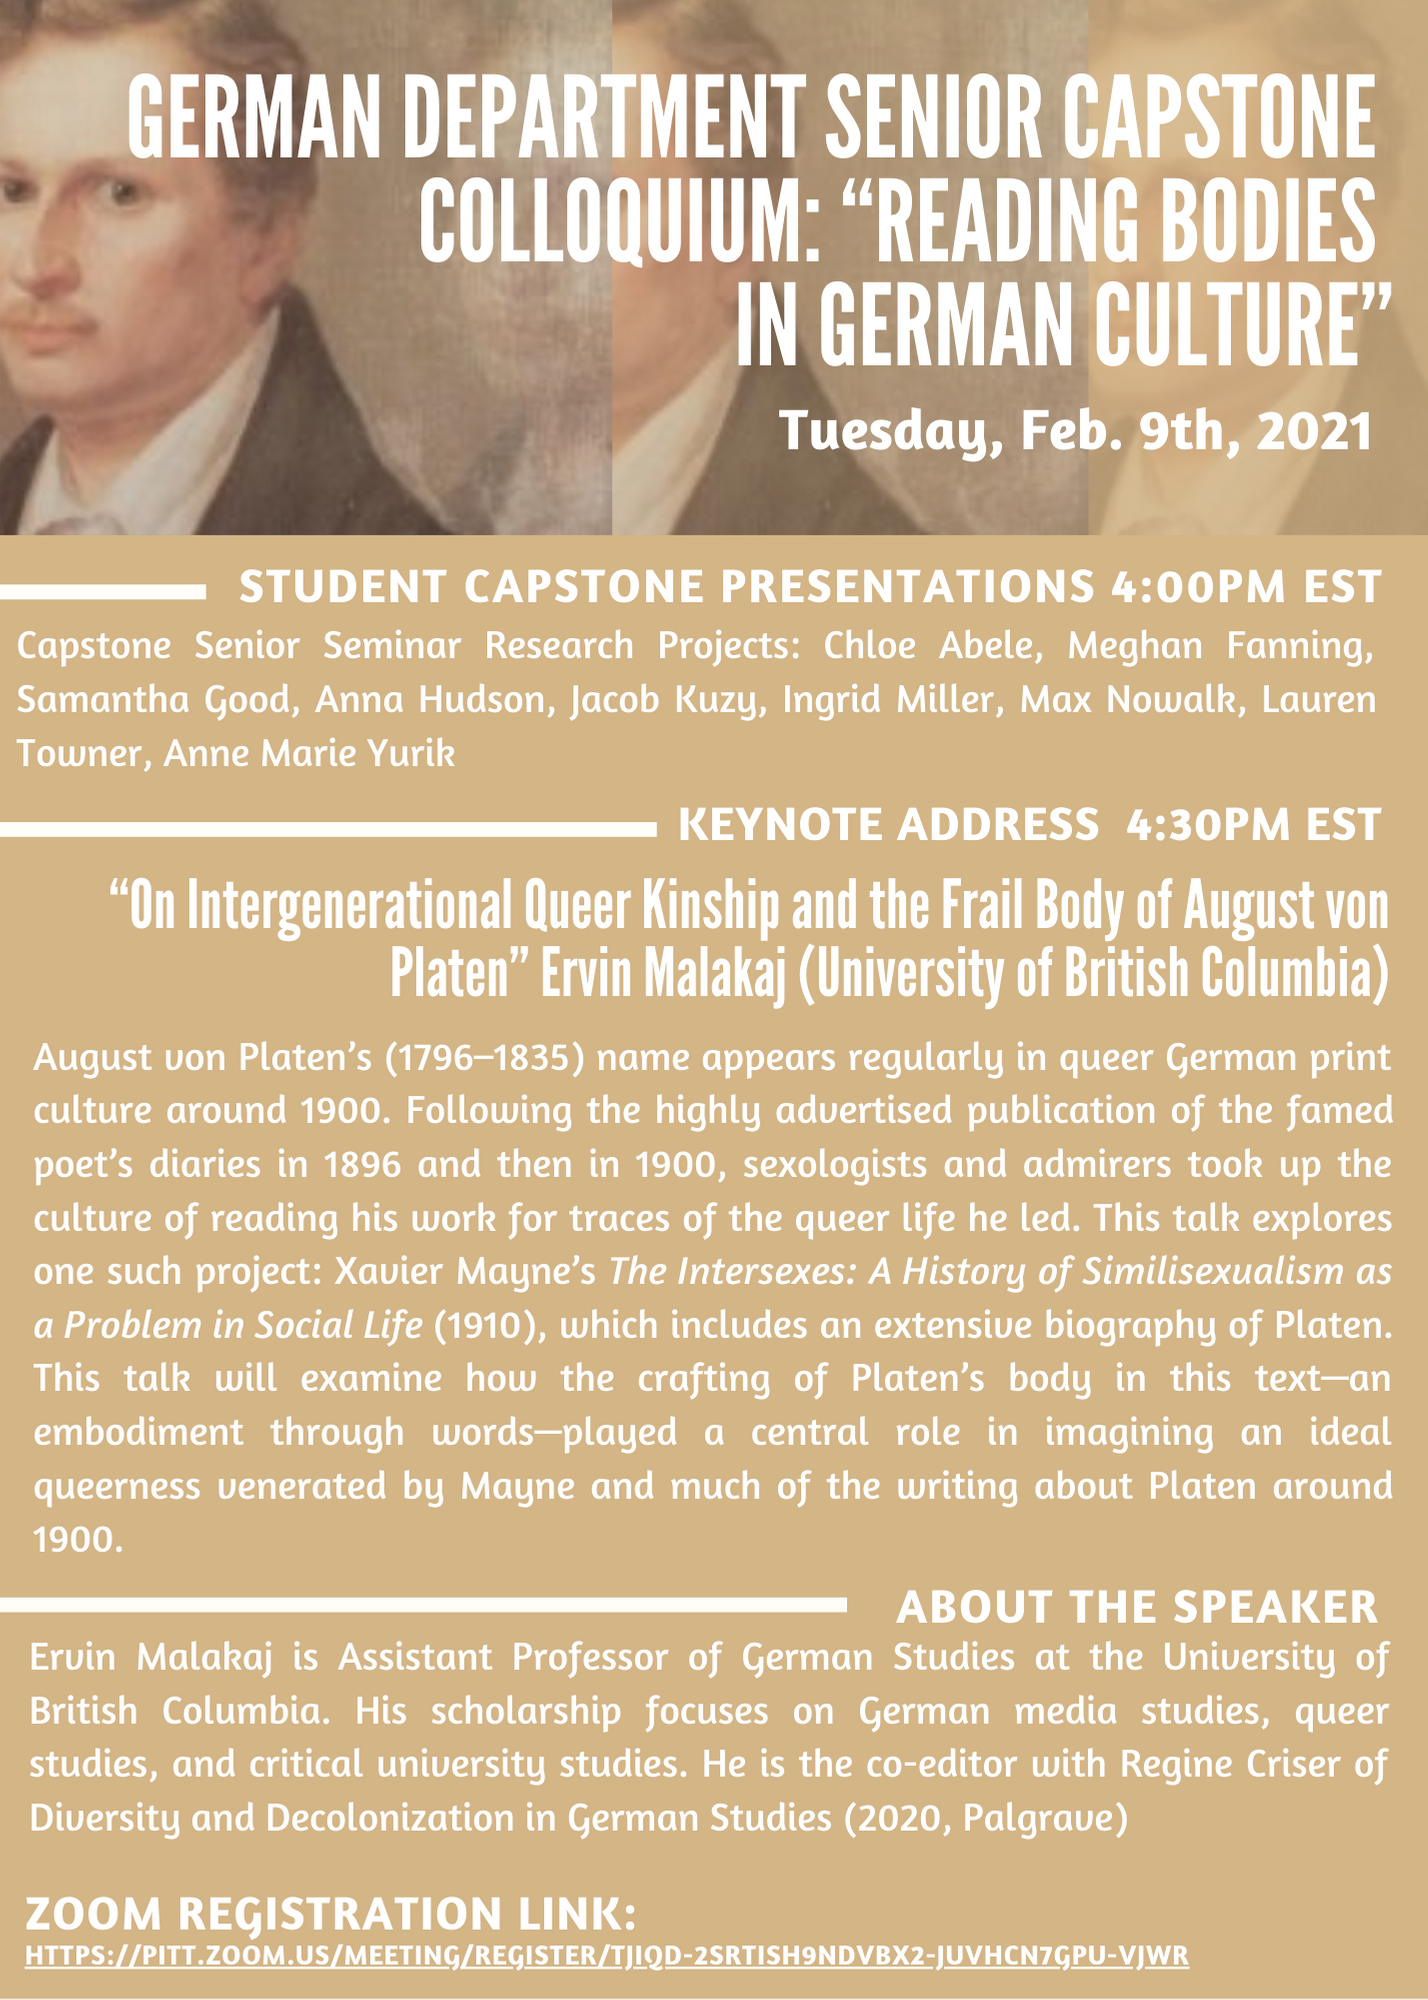 German Dept Colloquium flyer with the beige background and faded portrait of August von Platen